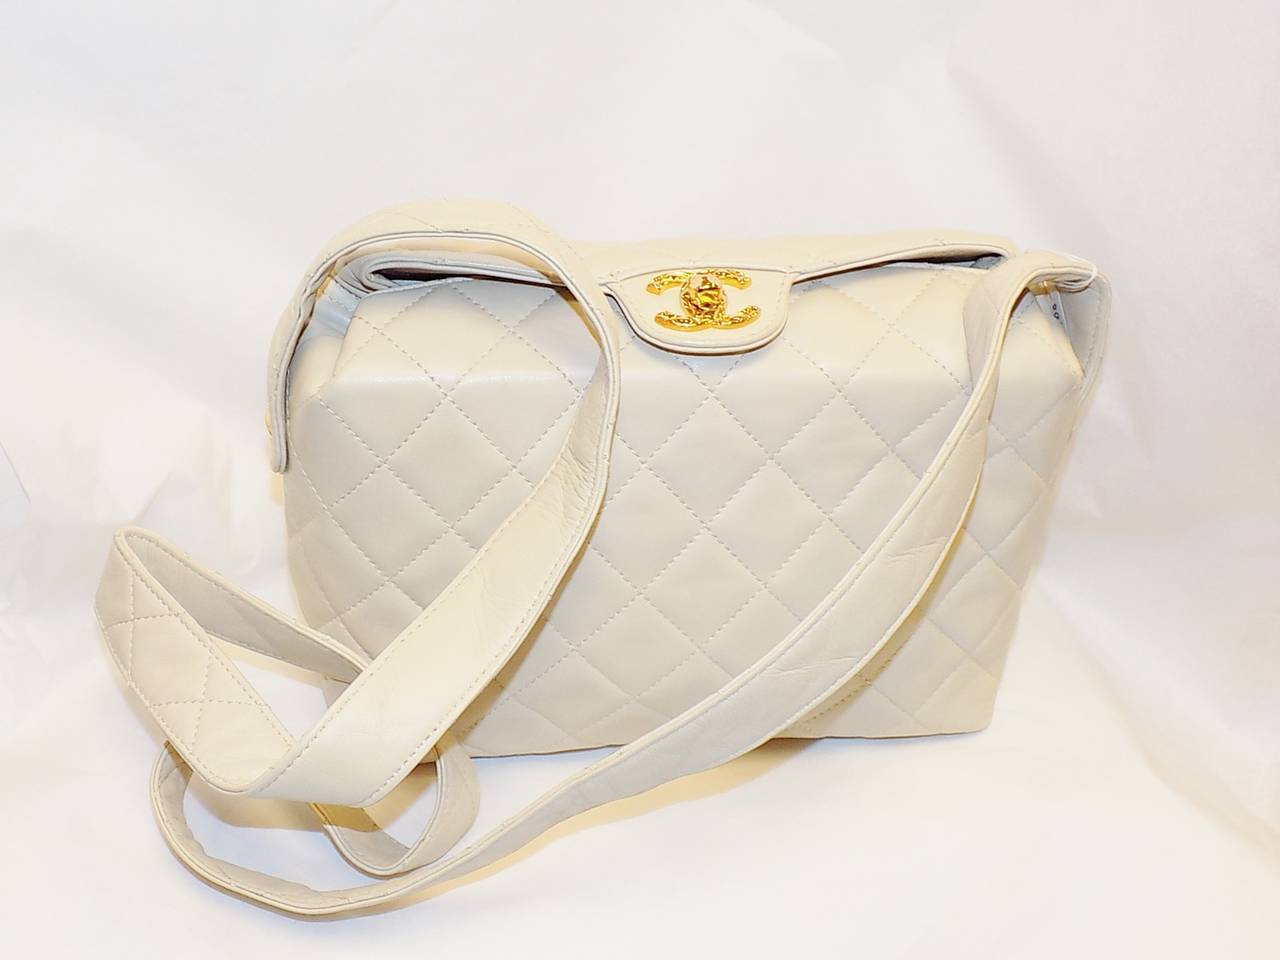 Chanel Creme lambskin quilted  shoulder bag In Excellent Condition For Sale In New York, NY